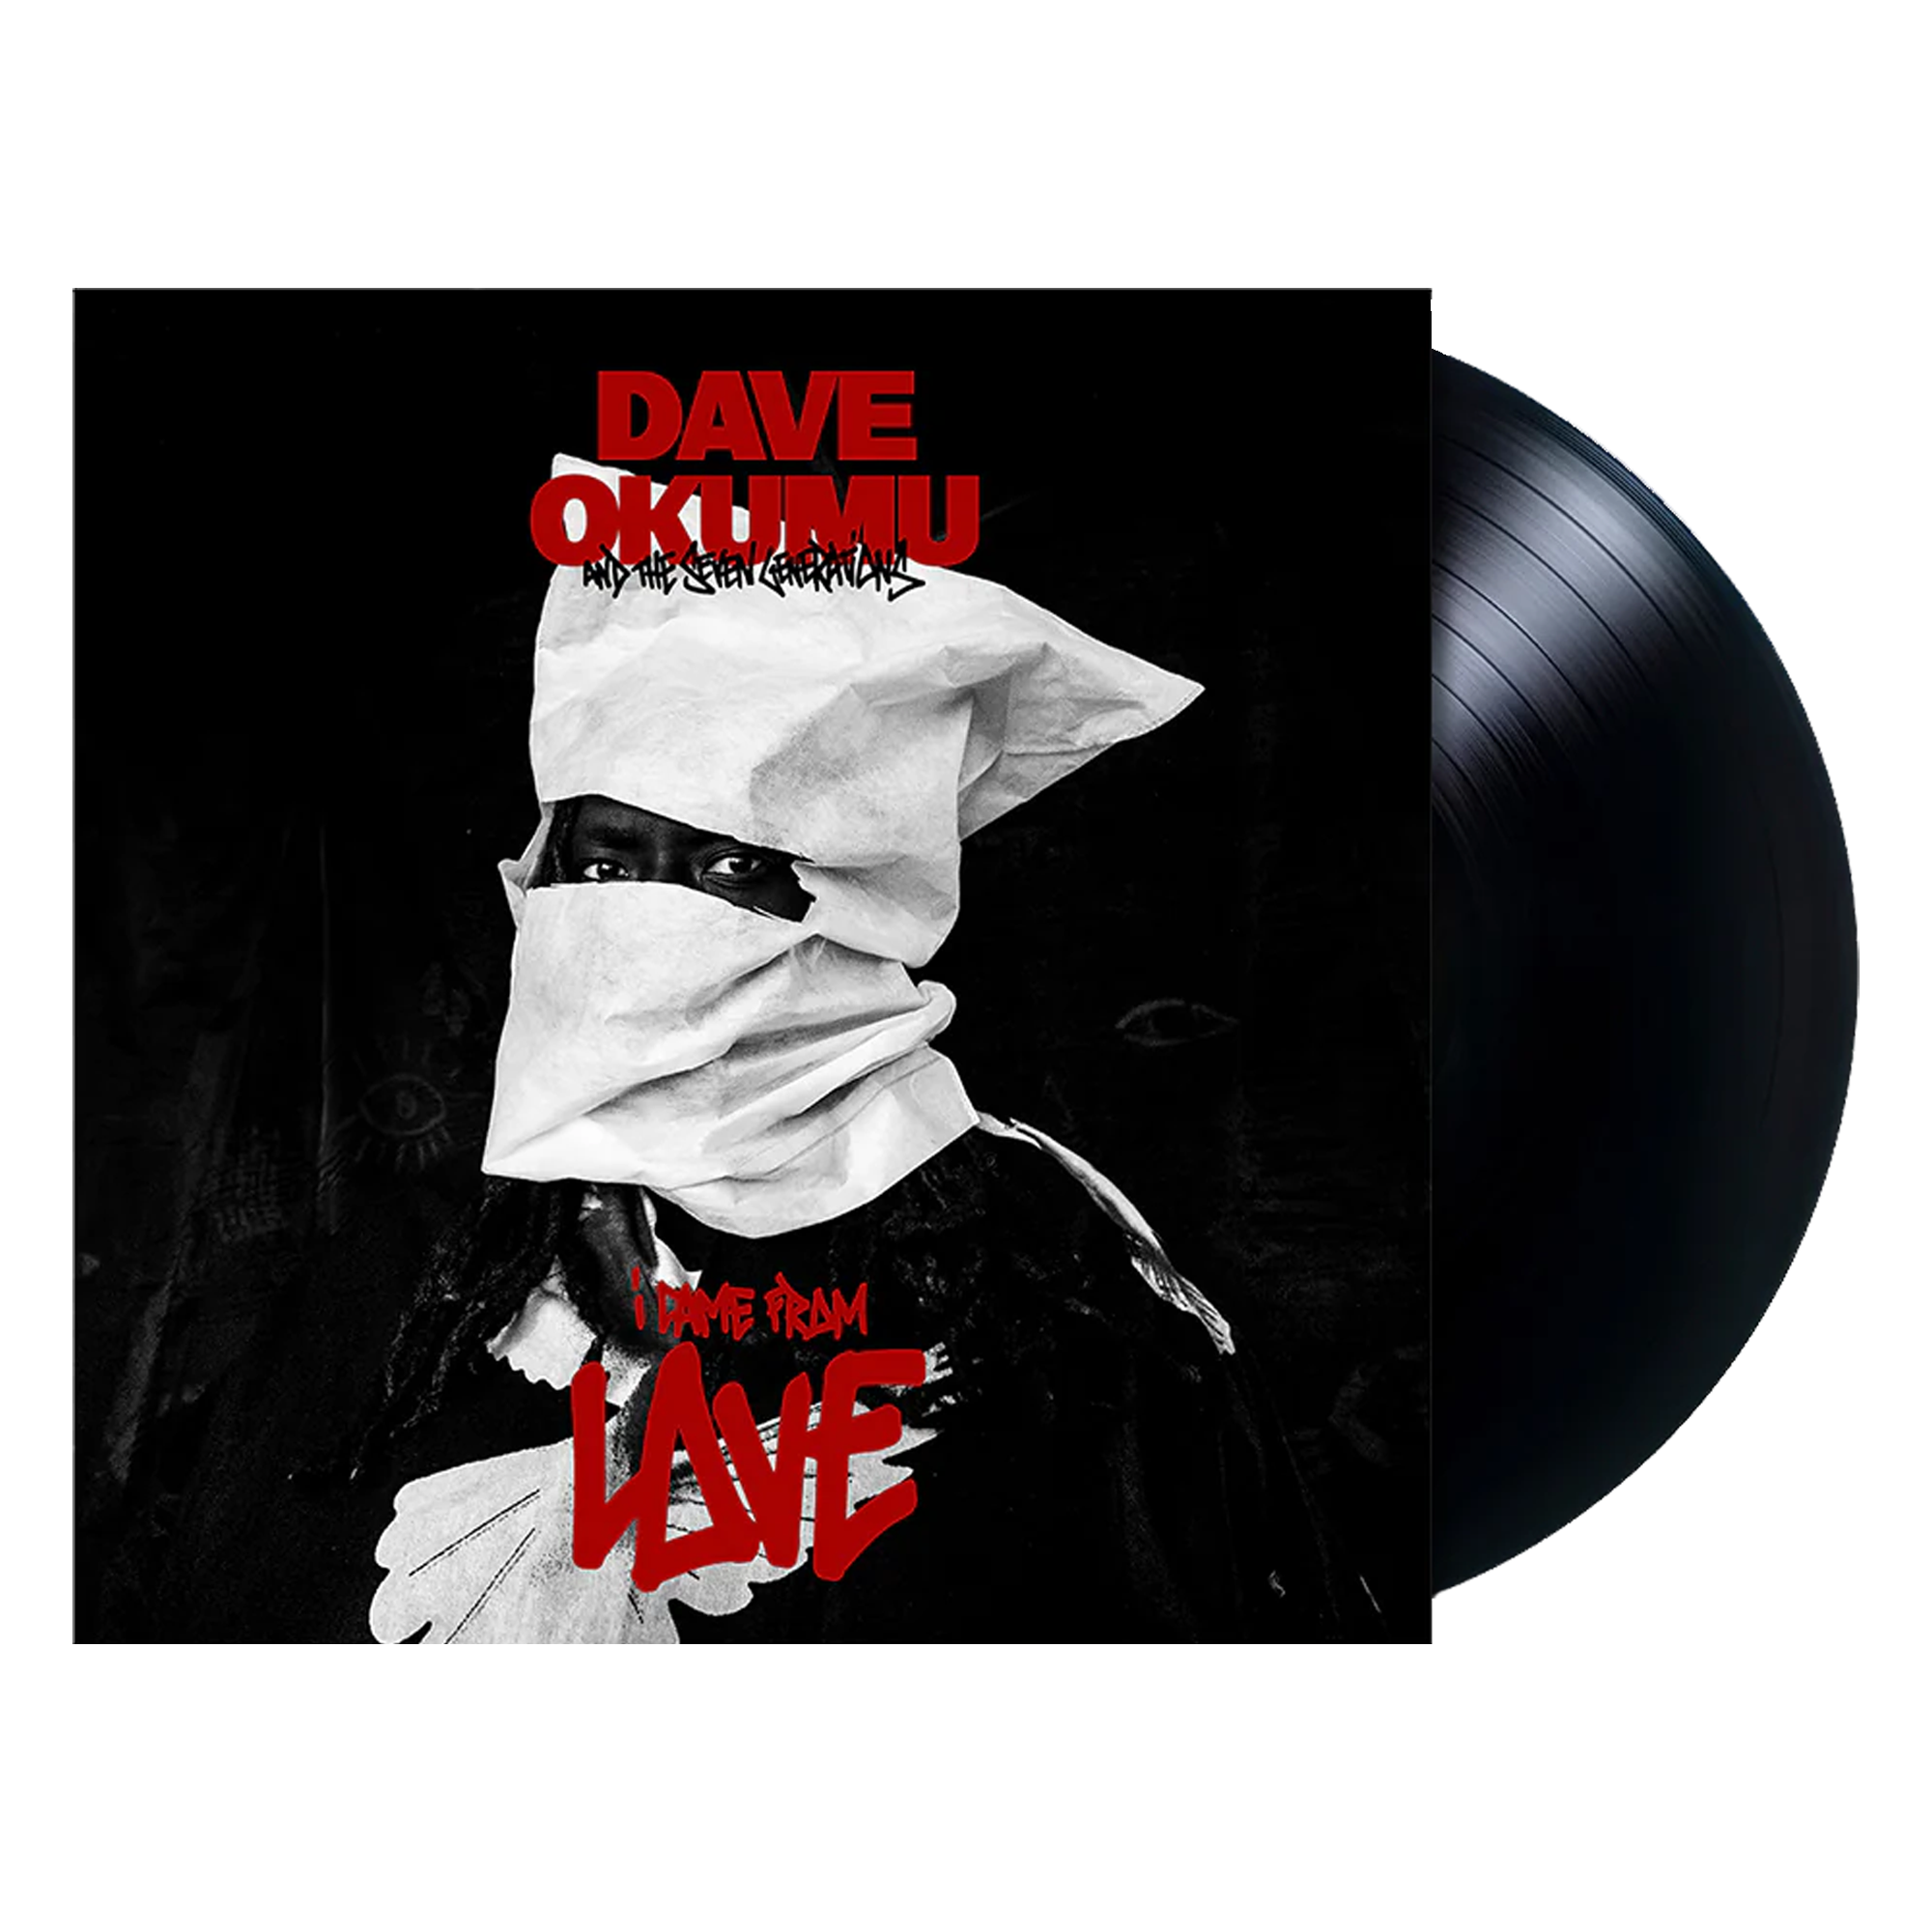 I Came From Love: Vinyl LP